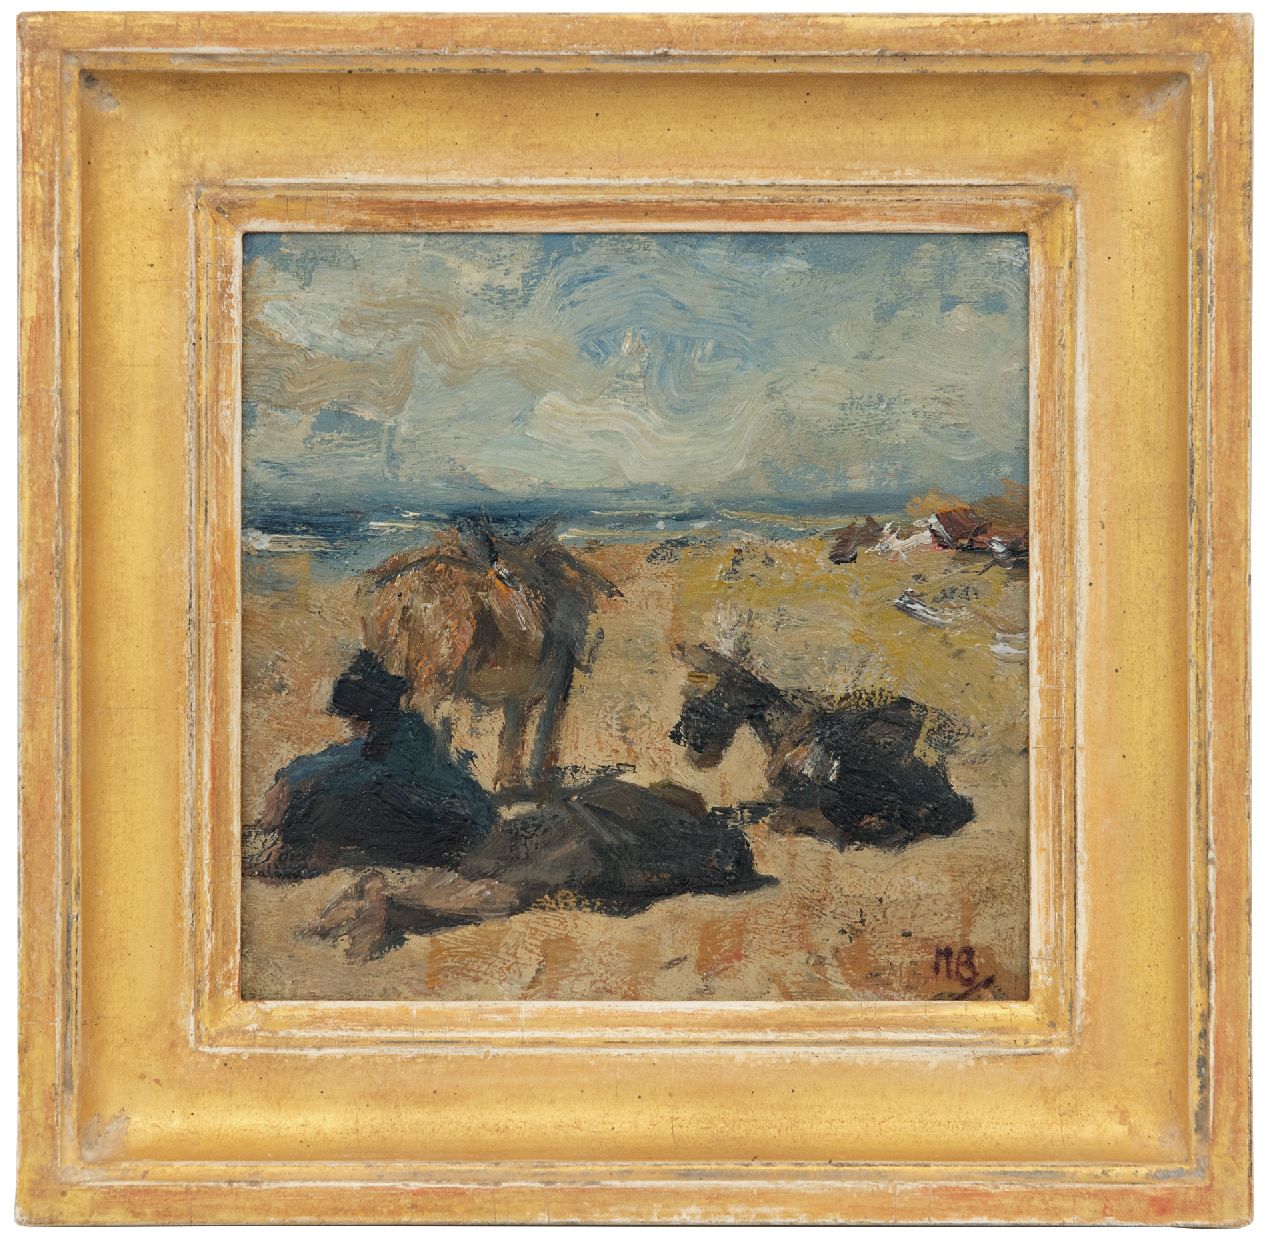 Bauer M.A.J.  | 'Marius' Alexander Jacques Bauer, Donkeys resting on the beach, oil on panel 18.5 x 18.6 cm, signed l.r. with initials